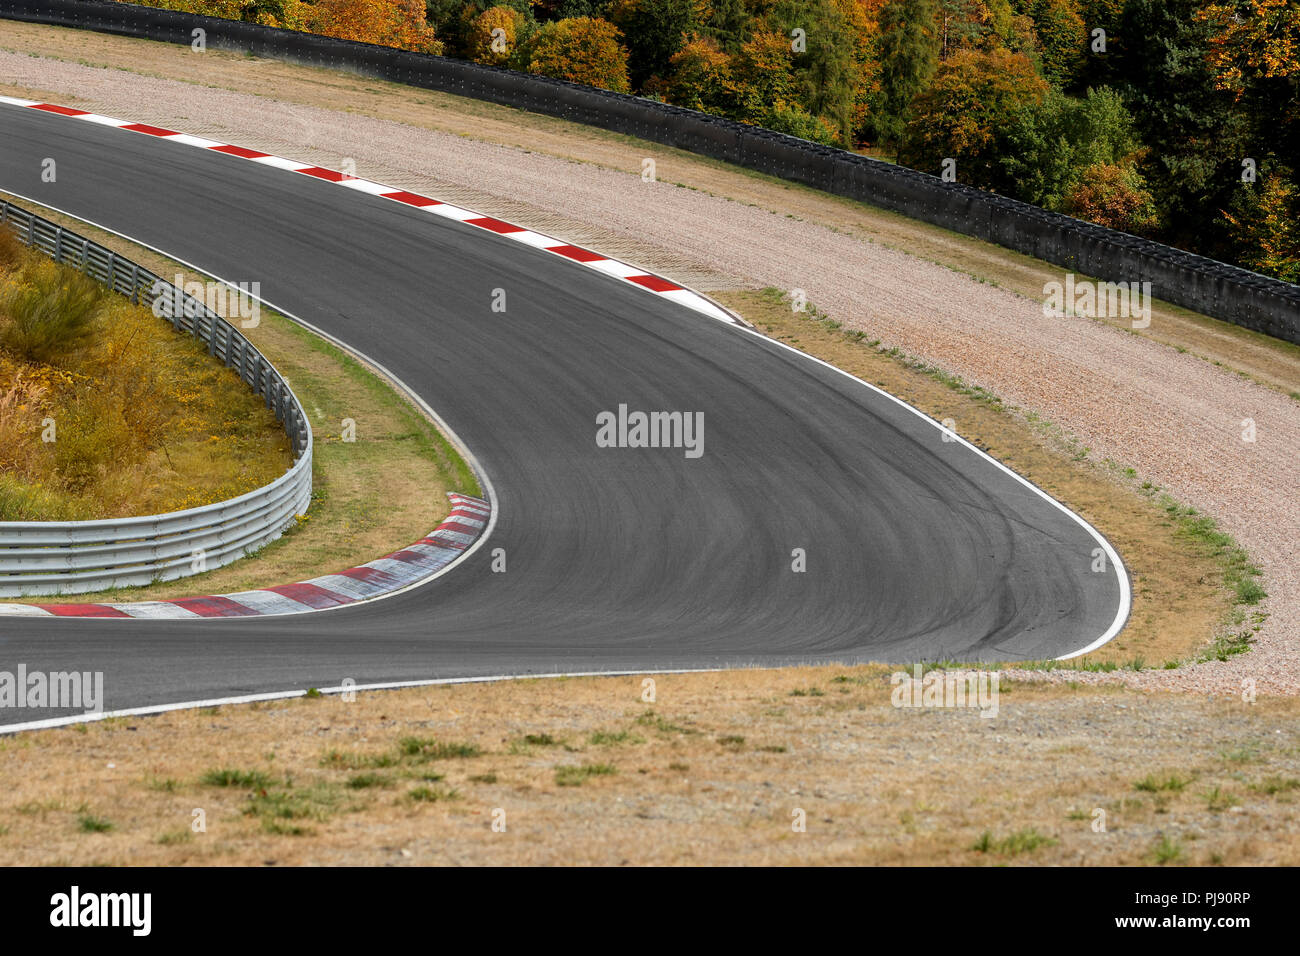 View on empty race track circuit with red white curbs motorsport concept racing background Stock Photo